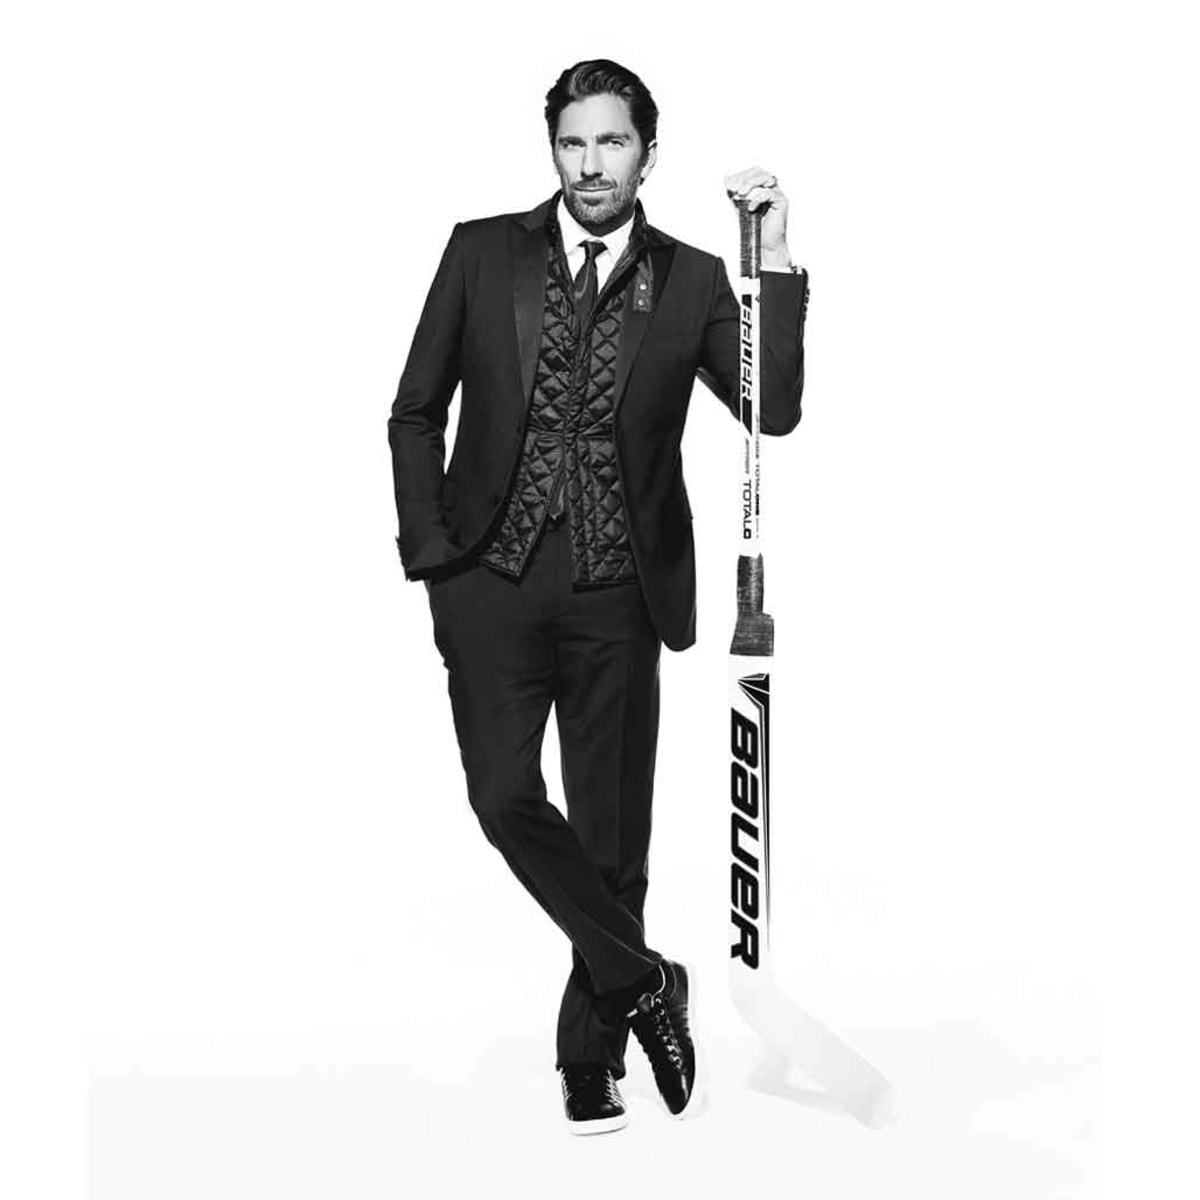 Rangers Goalie Henrik Lundqvist Shares Gameday Routine and Style Tips